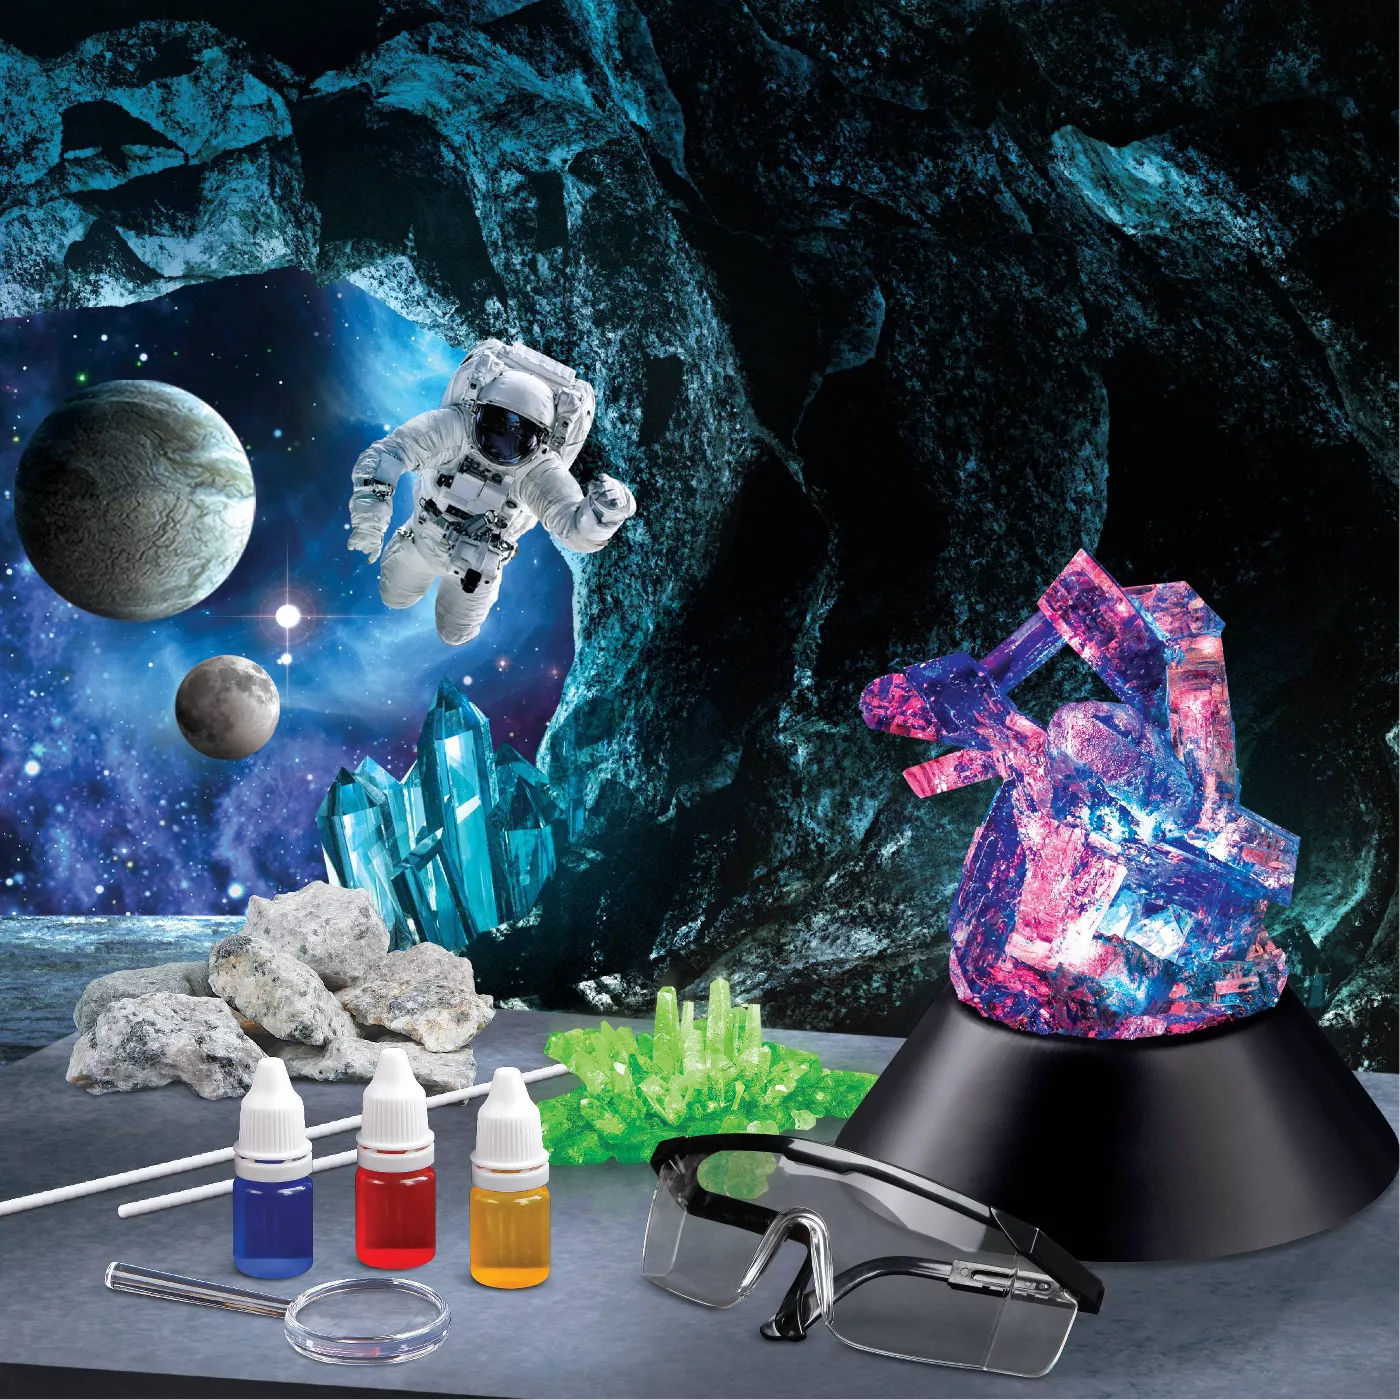 Crystal Growing Kit by Discovery #mindblown from Myer $59.99